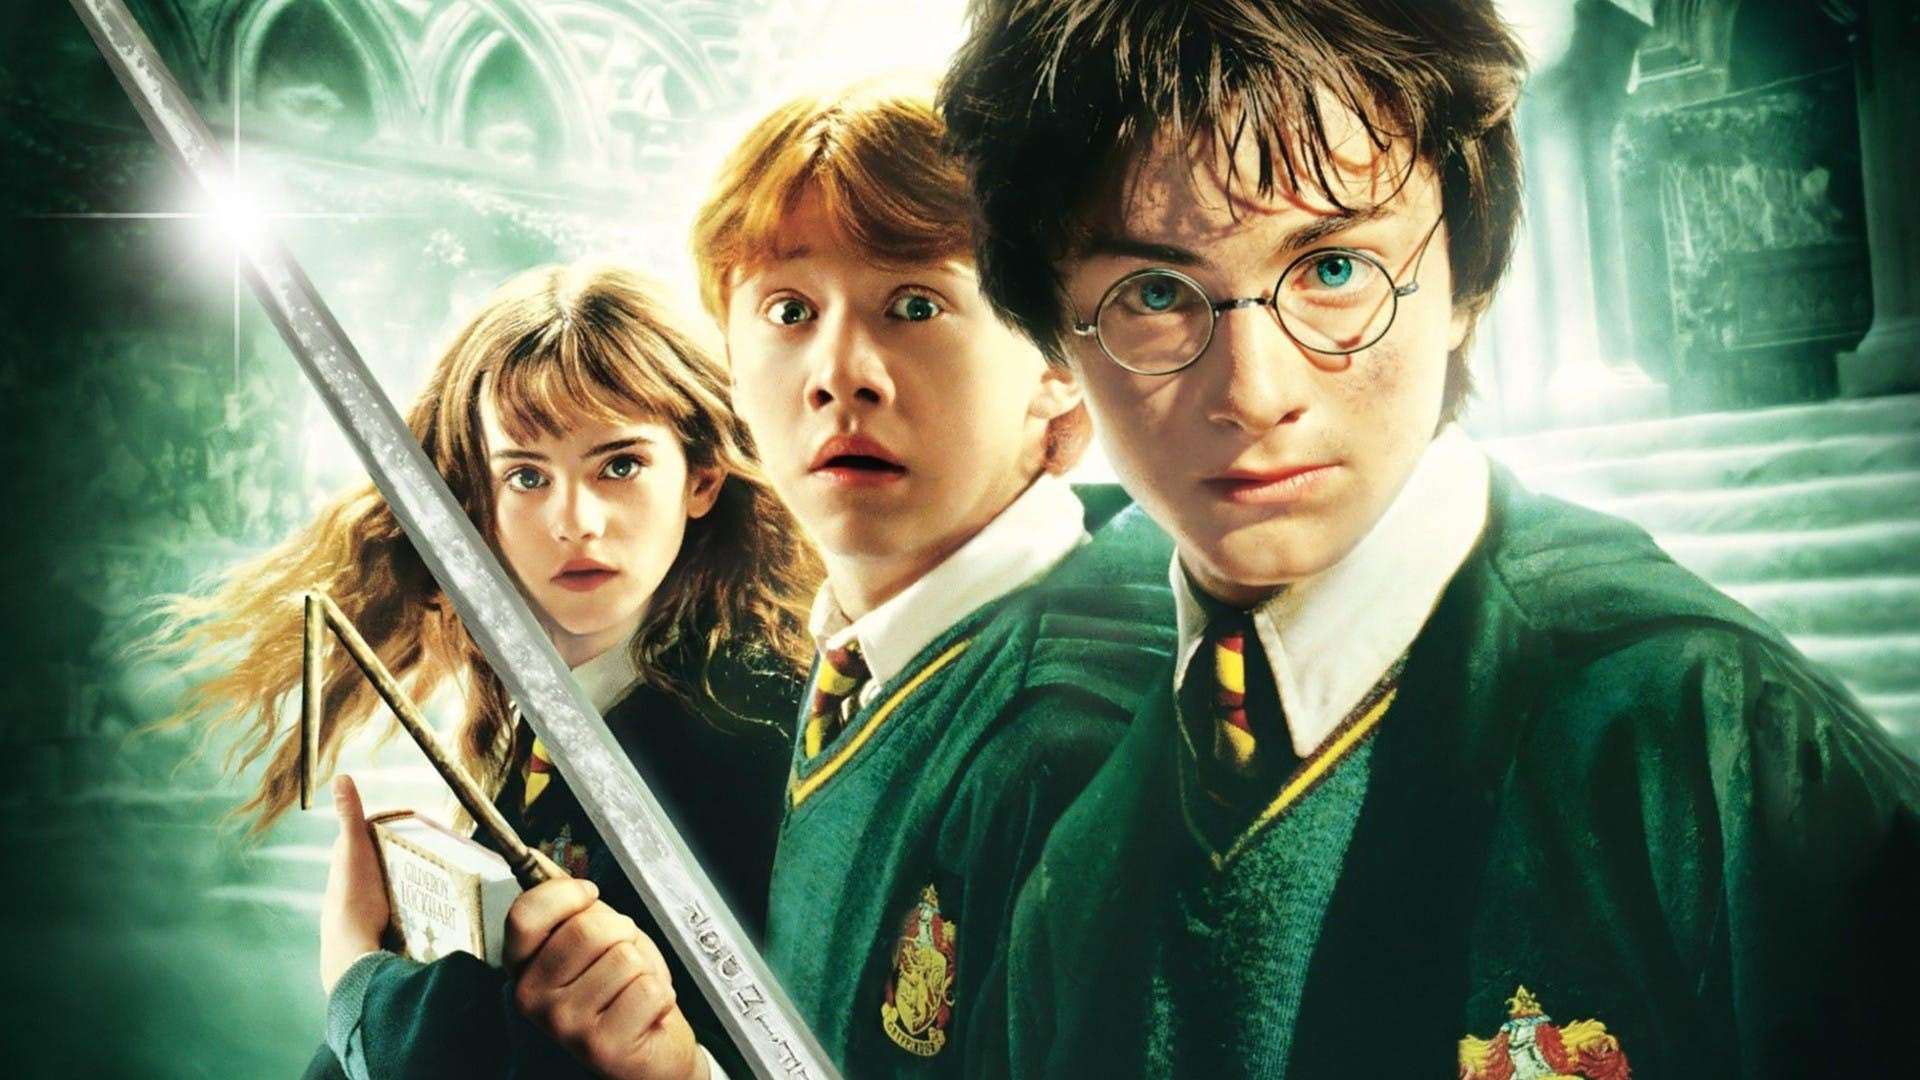 The Harry Potter films were released between 2001 and 2011 and became the fourth highest-grossing film series in history. Picture: Warner Bros.